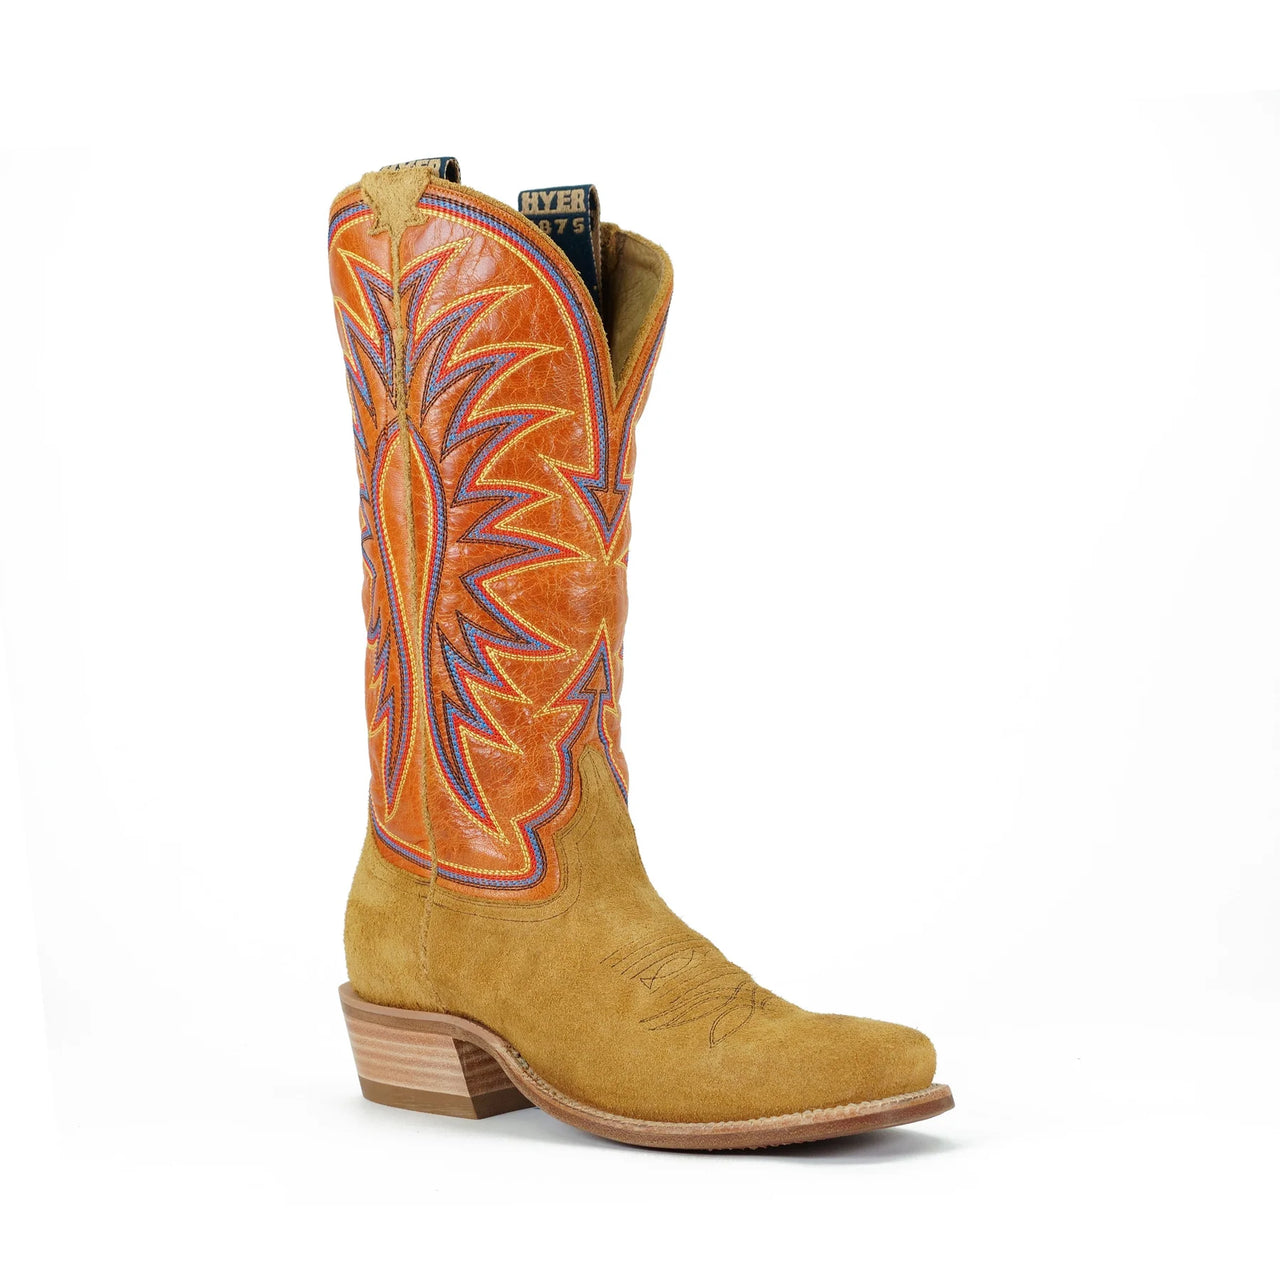 Hyer Women's Rose Hill Western Boots - Bronze Napped Roughout